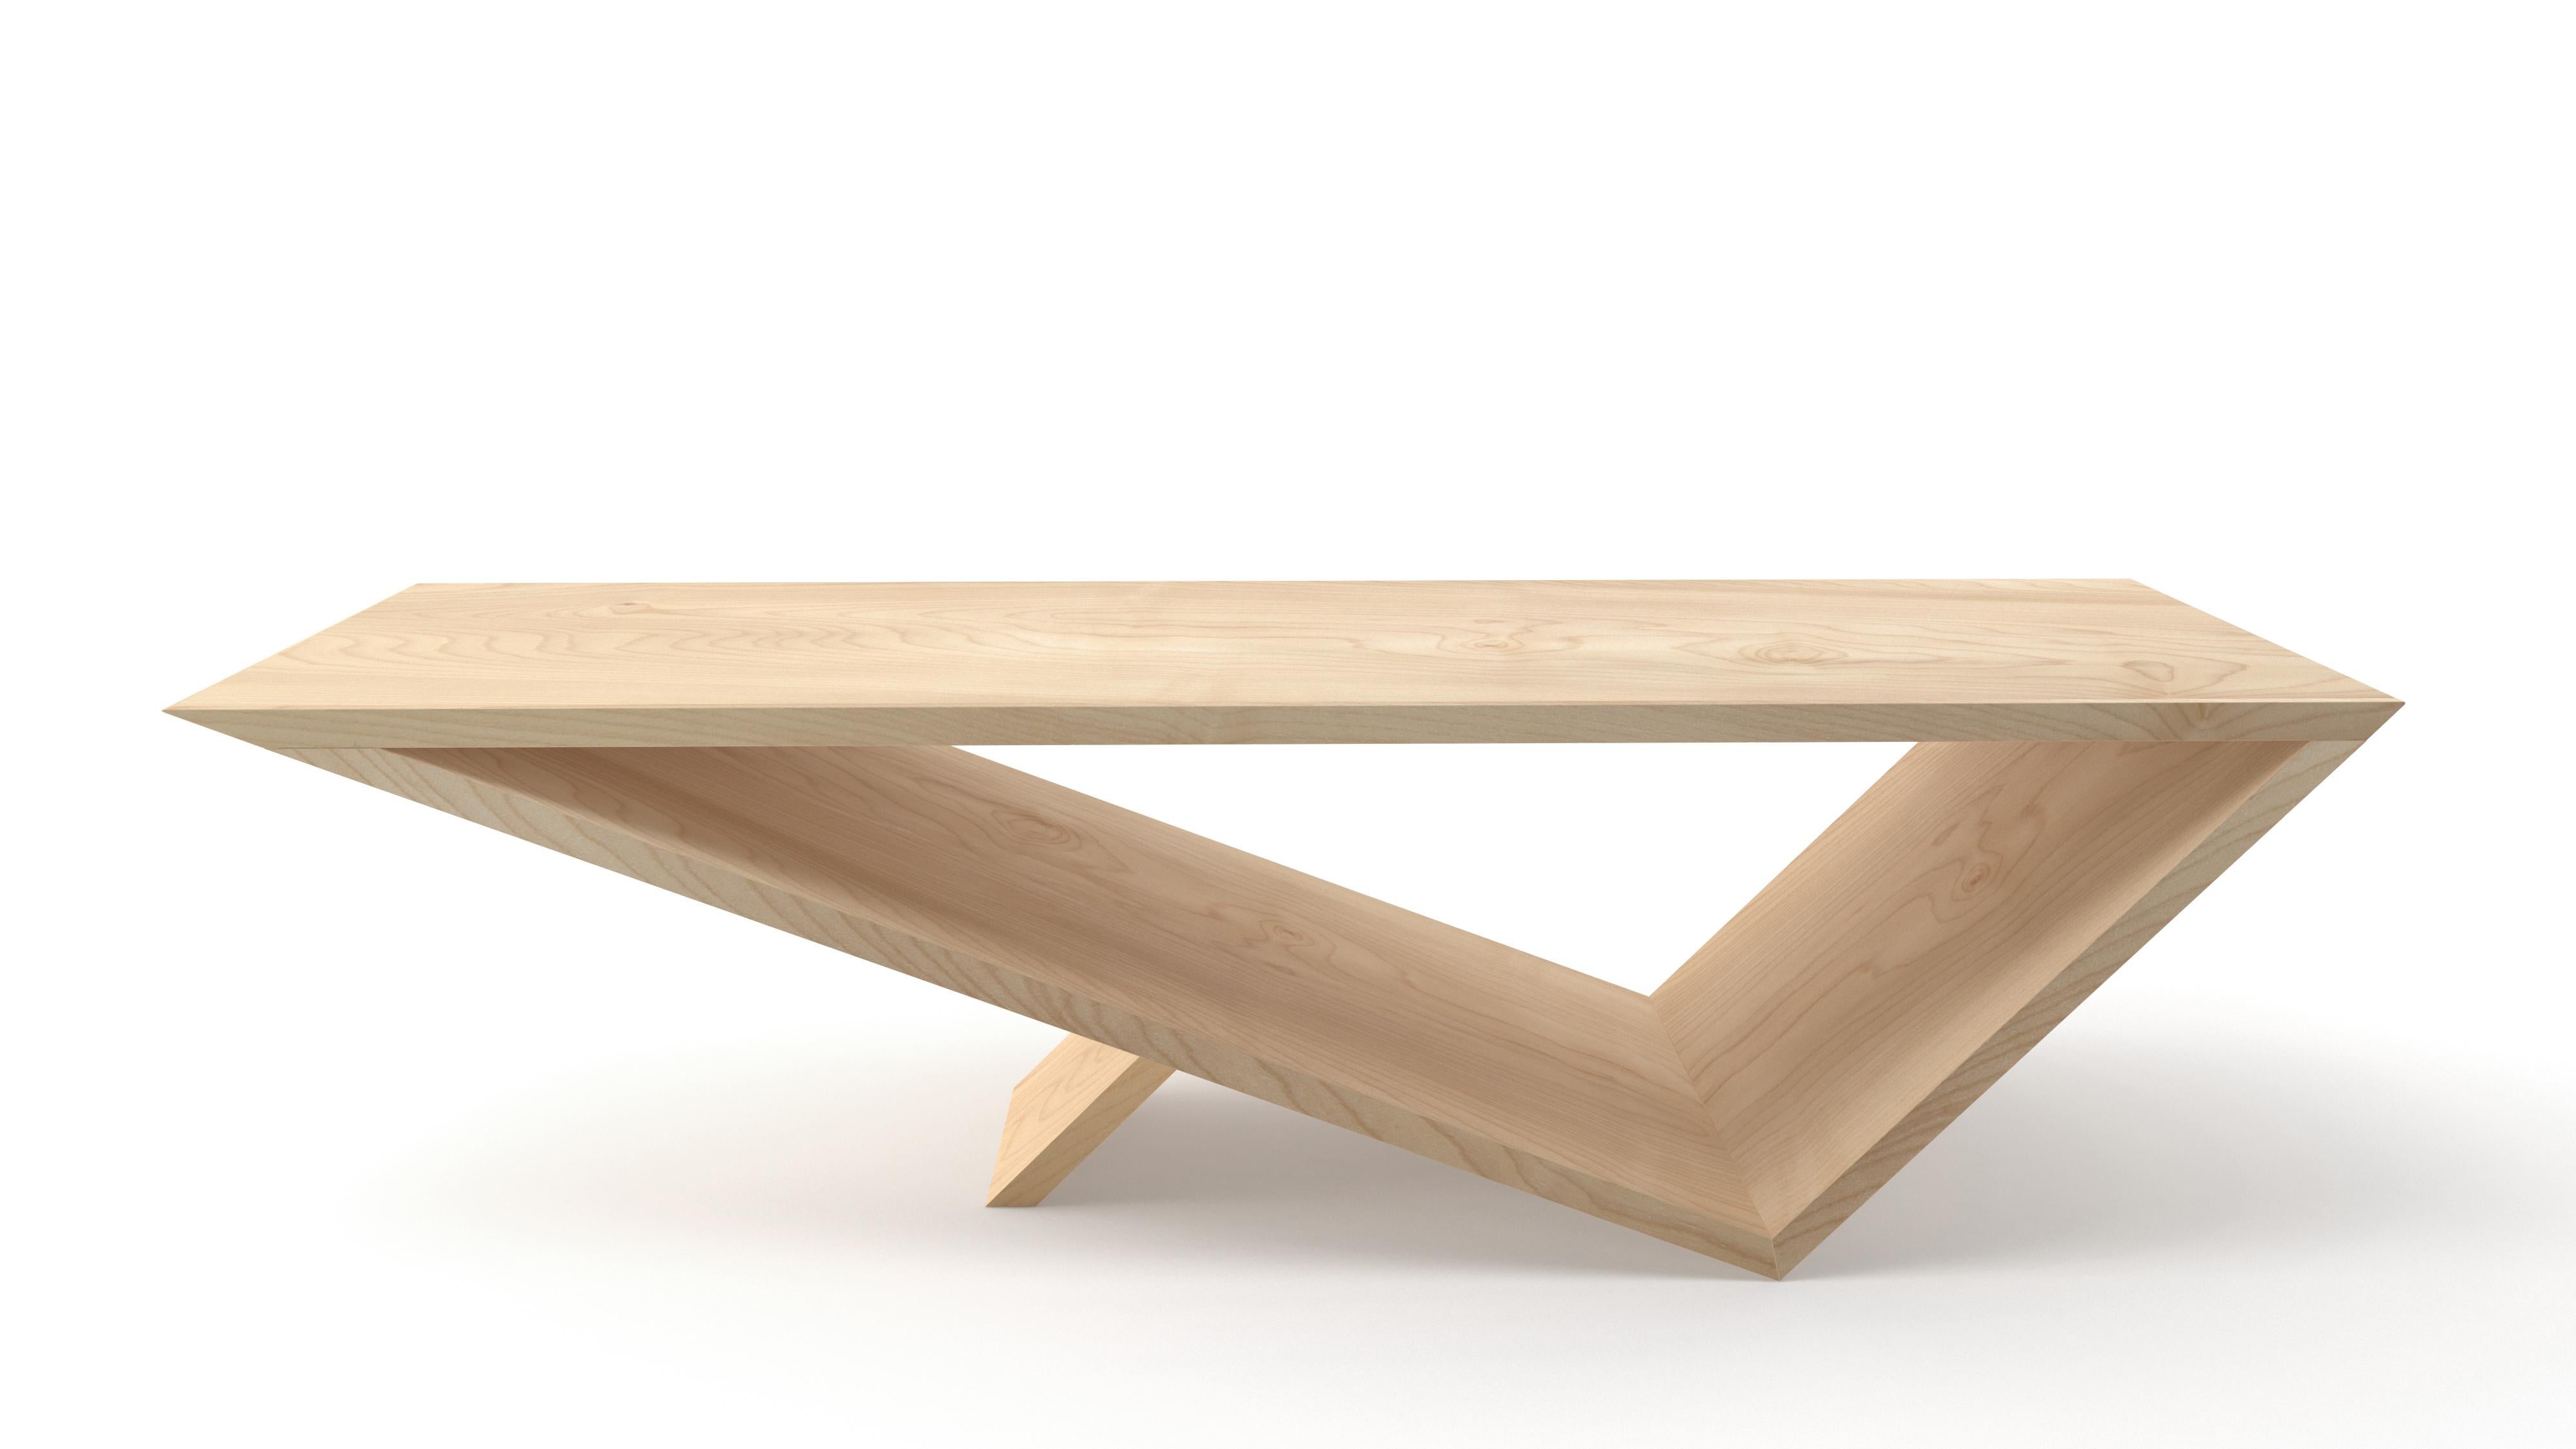 Time/space portal coffee table in maple by Neal Aronowitz Design
Dimensions: D 167.7 x W 63.5 x H 45.7 cm
Materials: Maple.
This table can also be made in other hardwoods.

The inspiration for the Time/Space Portal Table collection comes from